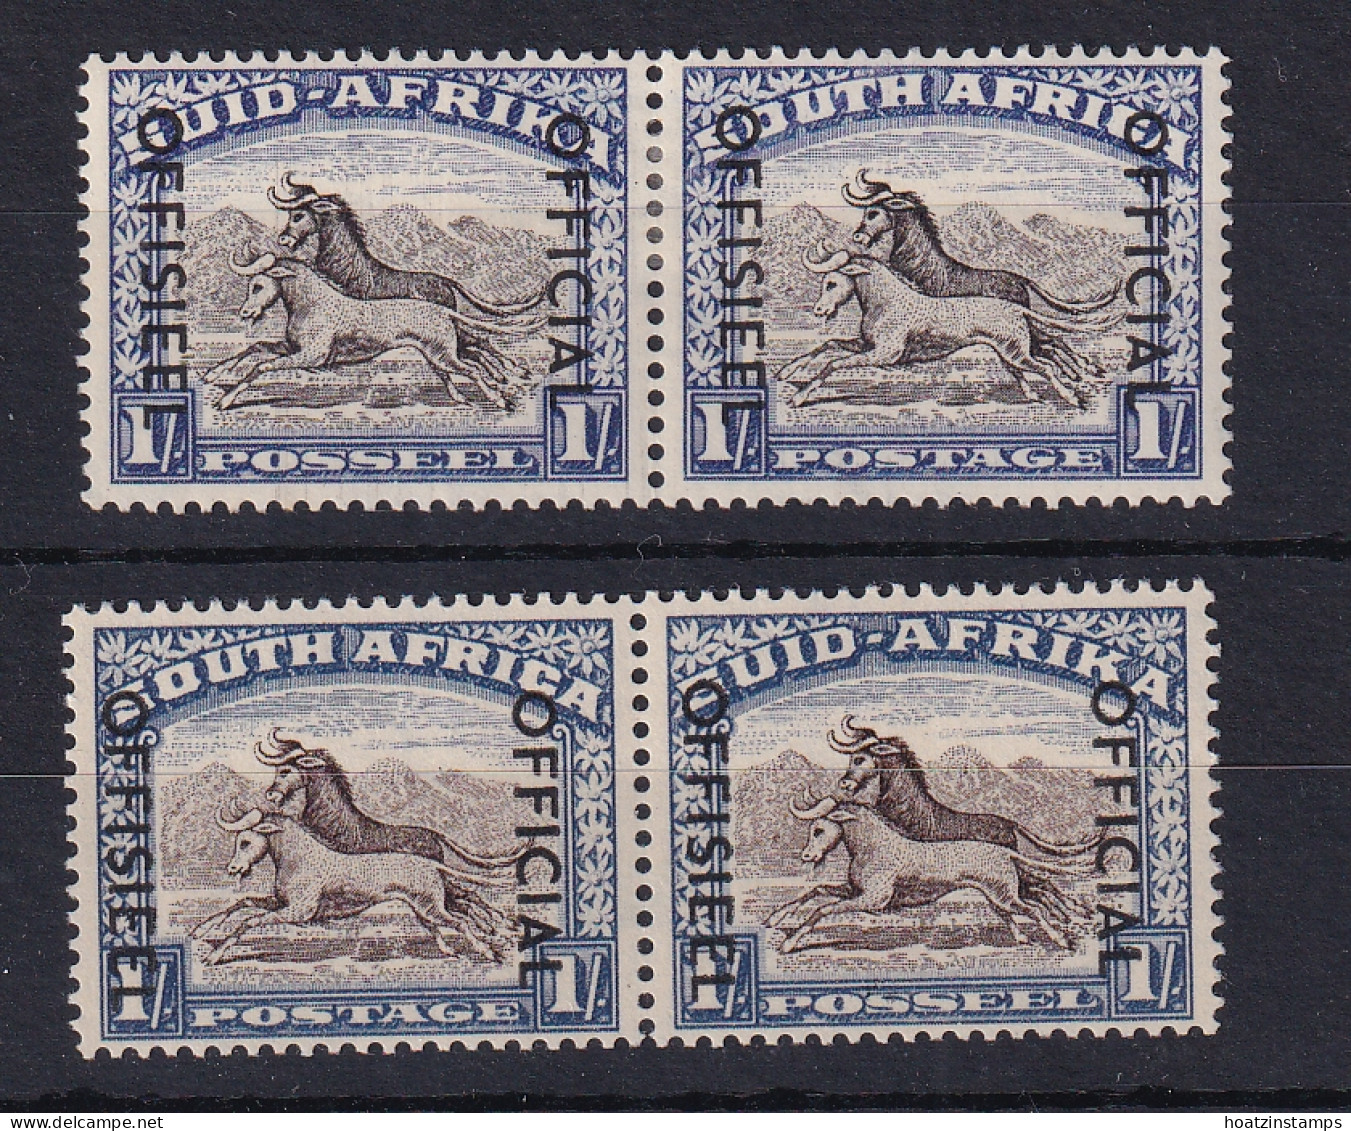 South Africa: 1950/54   Official - Wildebeest   SG O47 / O47a   1/-    MH Pair - Service